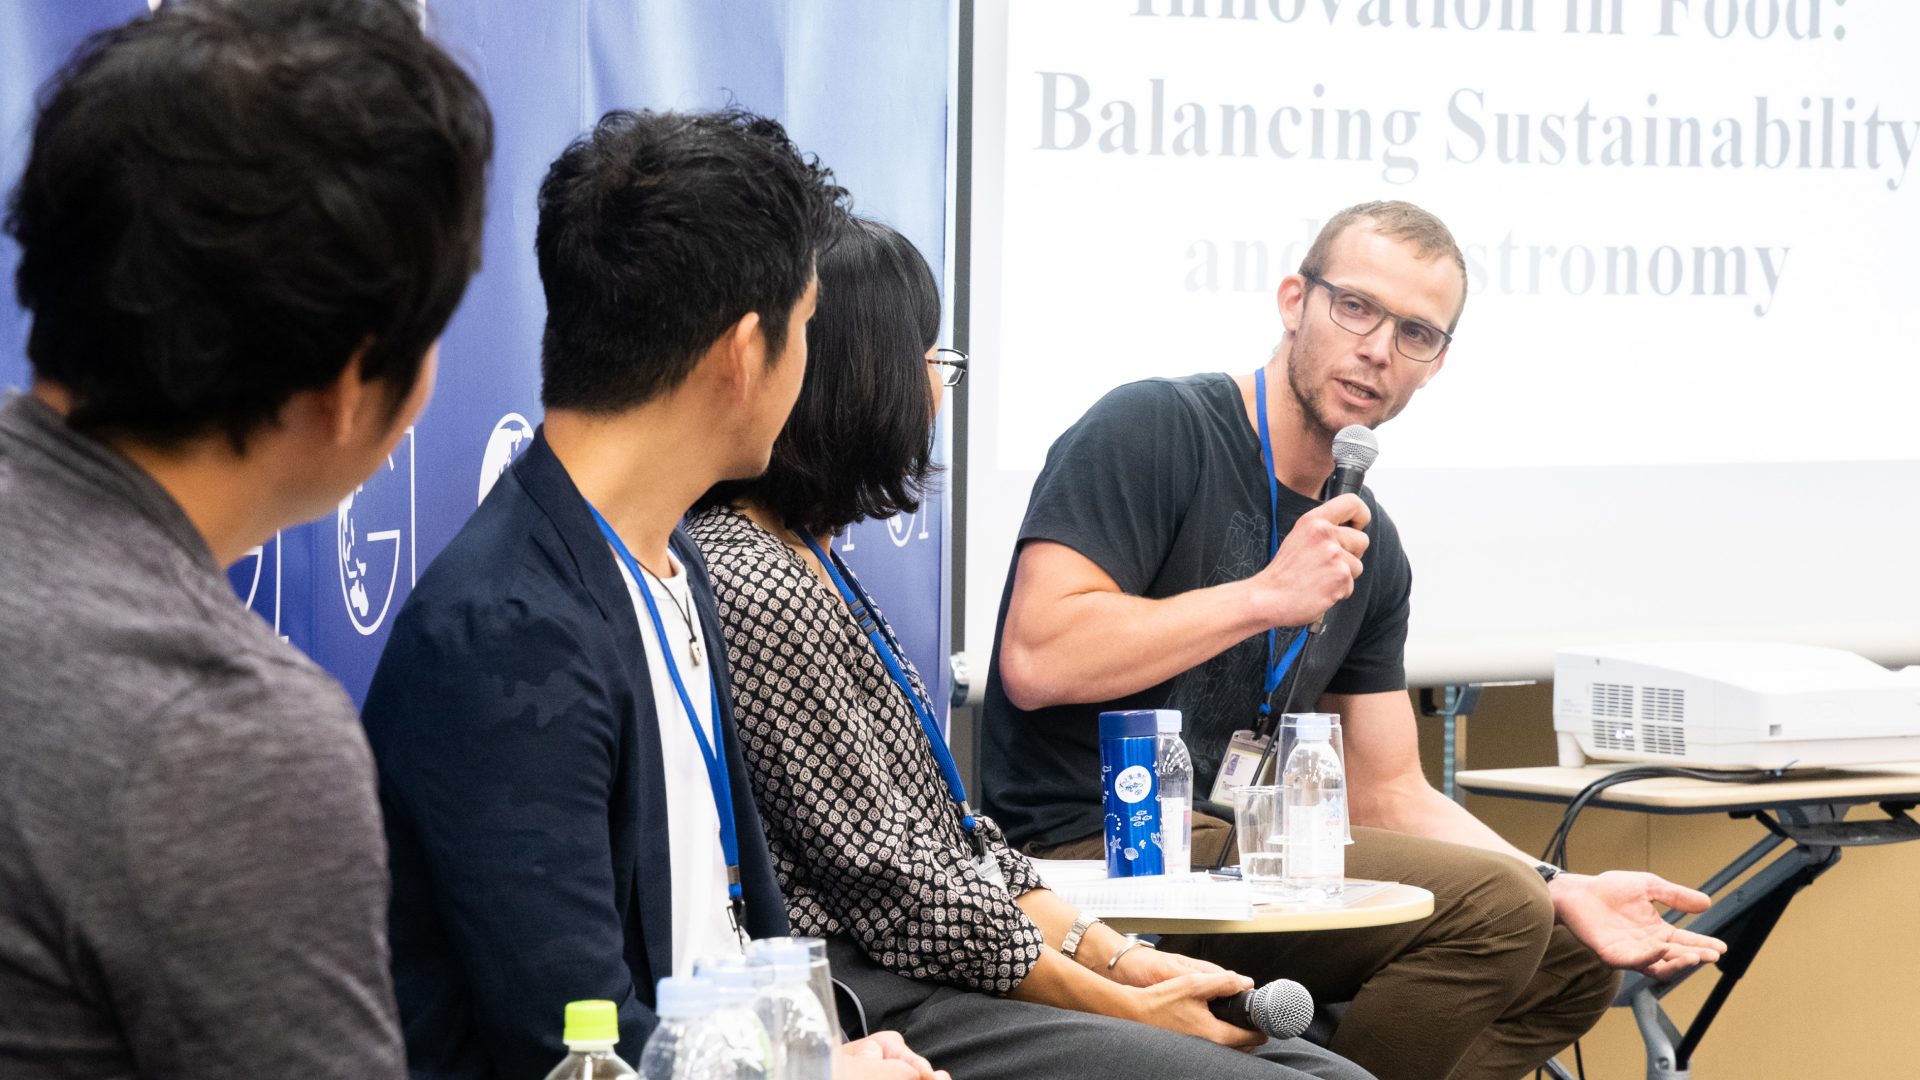 Disruption and Innovation in Food: Balancing Sustainability and Gastronomy (G1 Global 2019)